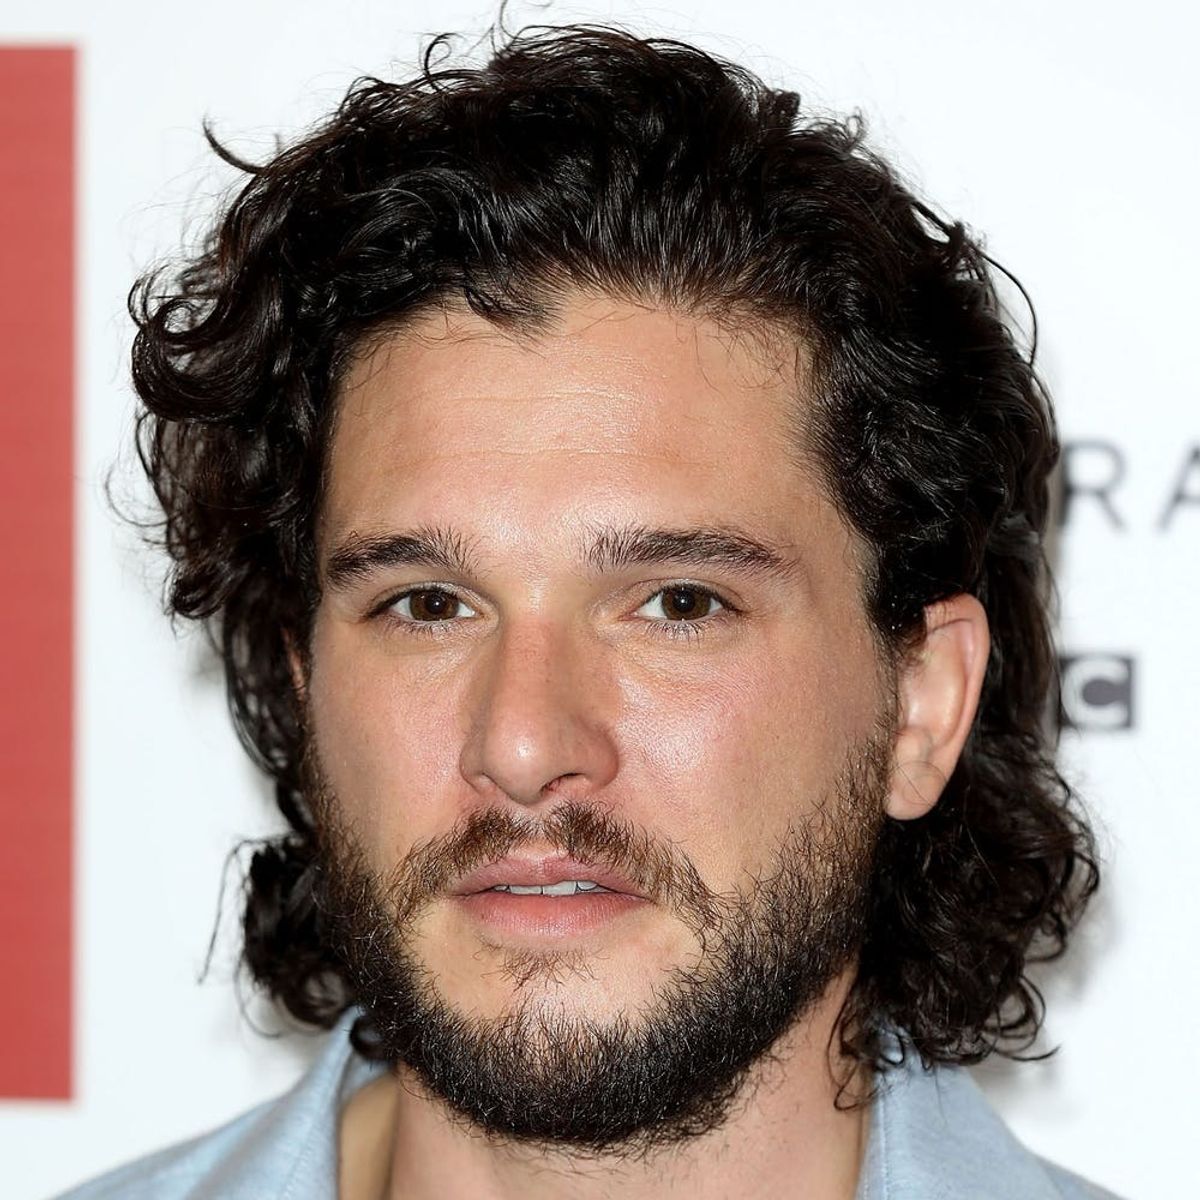 “Game of Thrones” Star Kit Harington Is Apologizing for Previous Quotes on Sexism